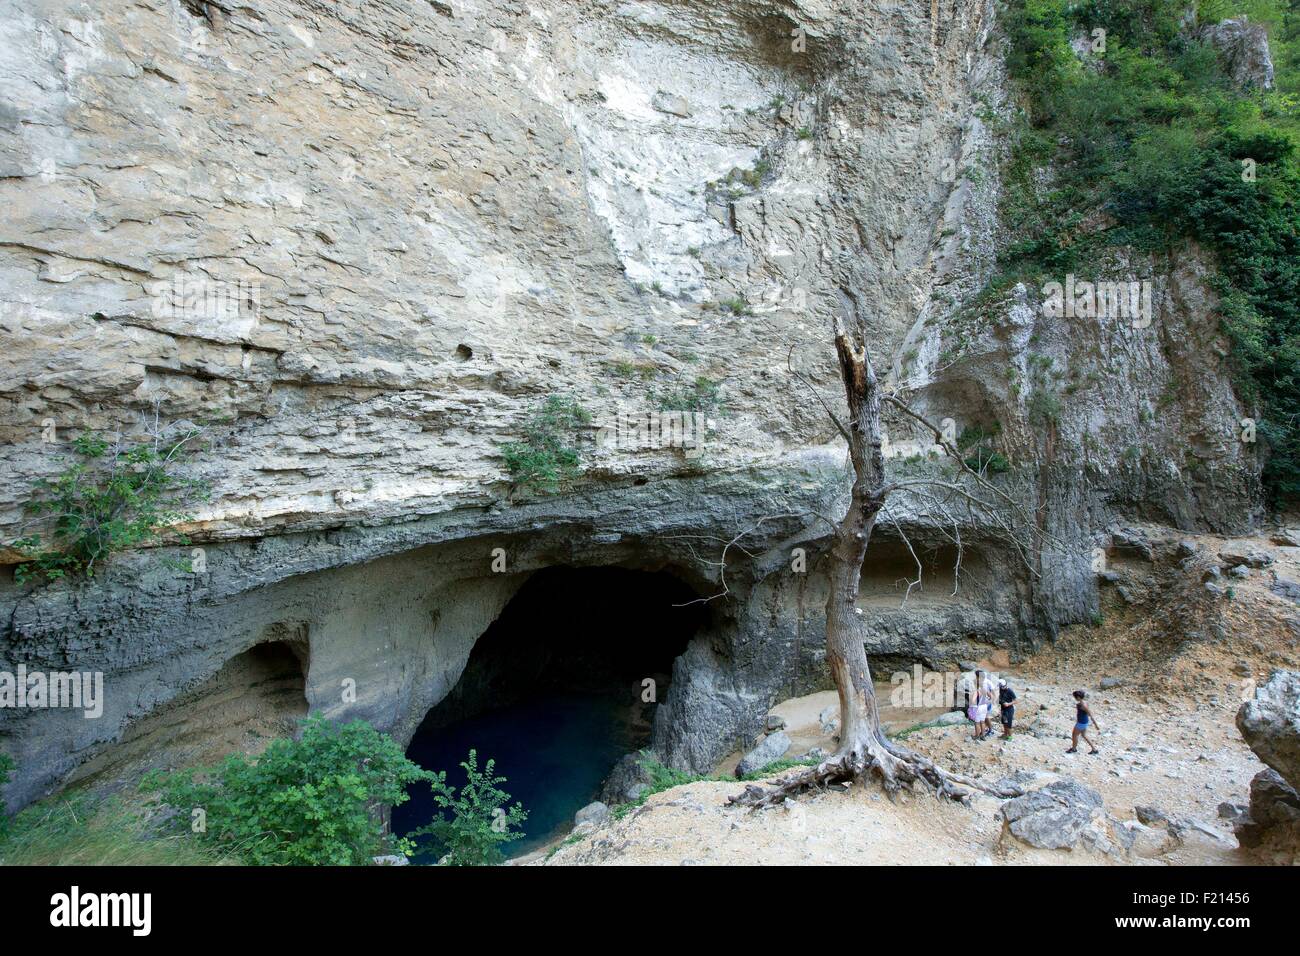 France, Vaucluse, Fontaine de Vaucluse, The Abyss Stock Photo